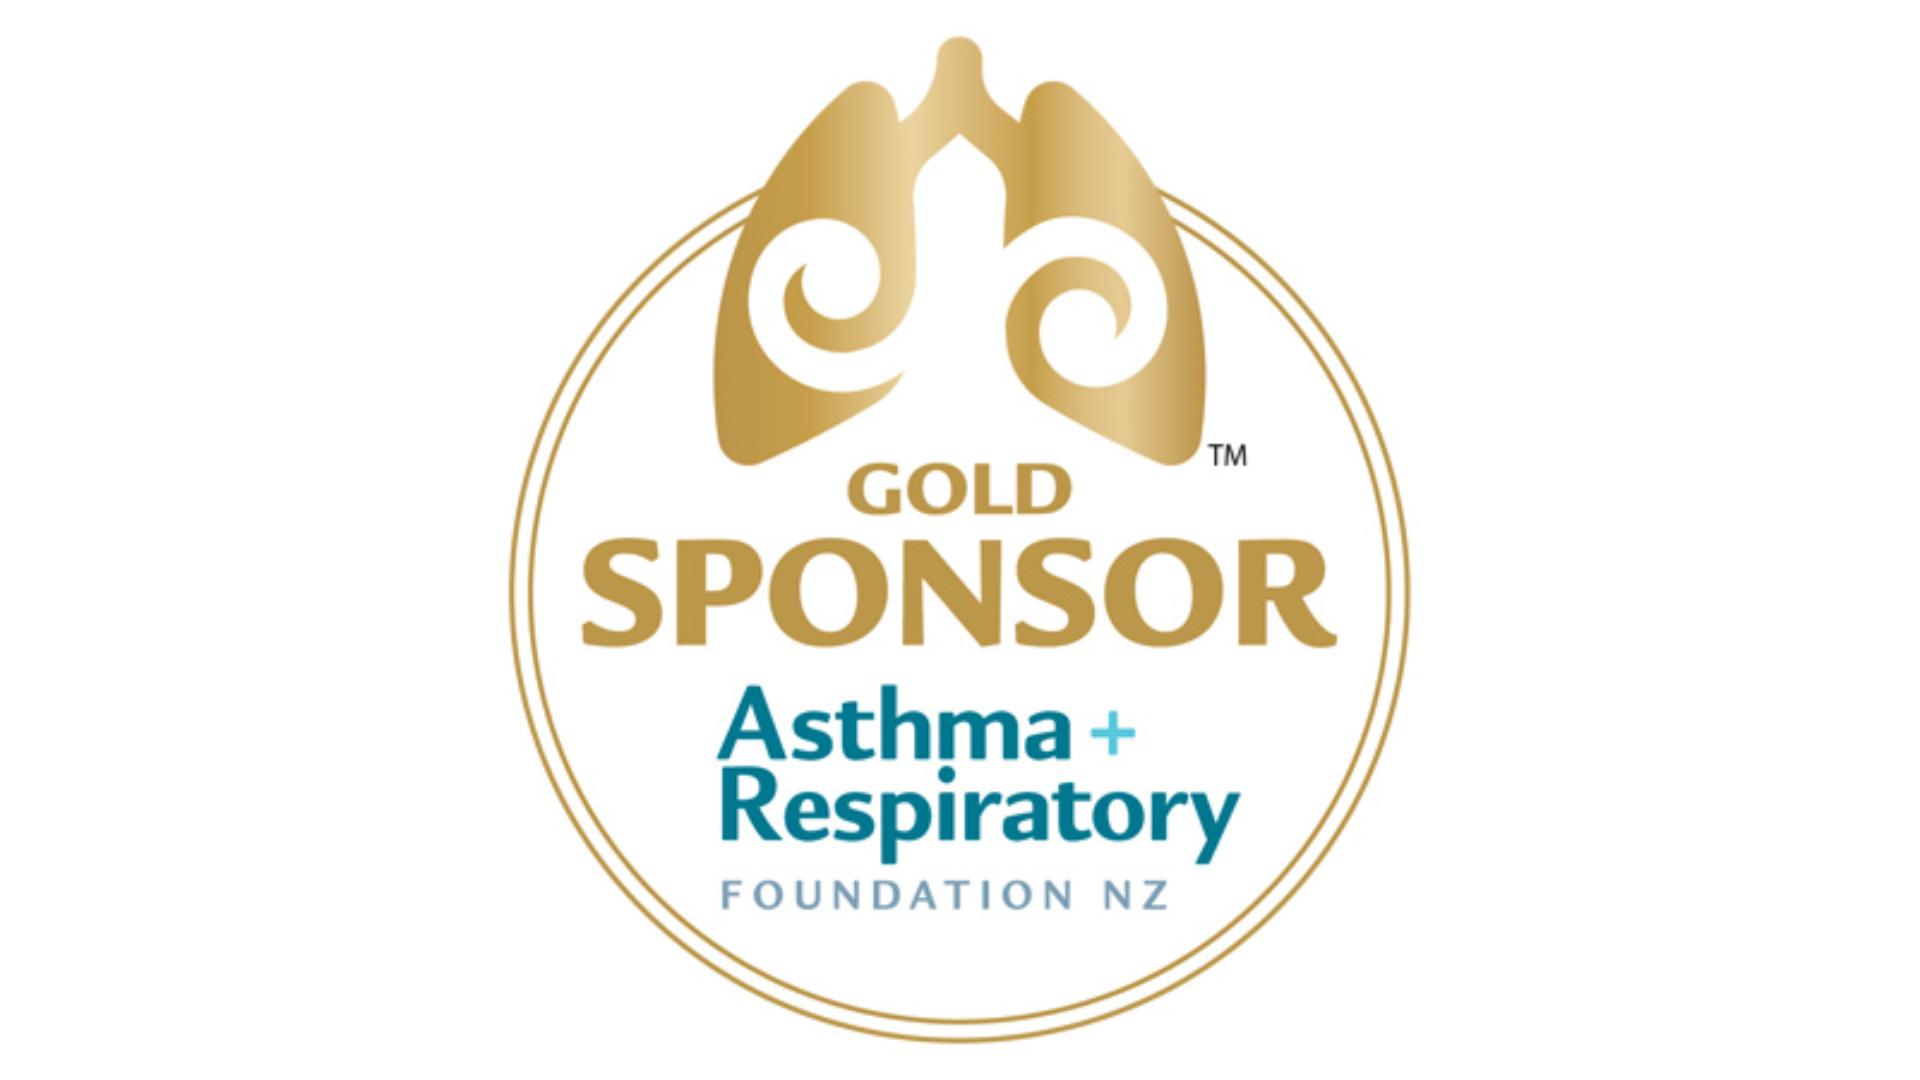 Dyson is a Gold Sponsor of the Asthma + Respiratory Foundation NZ Logo